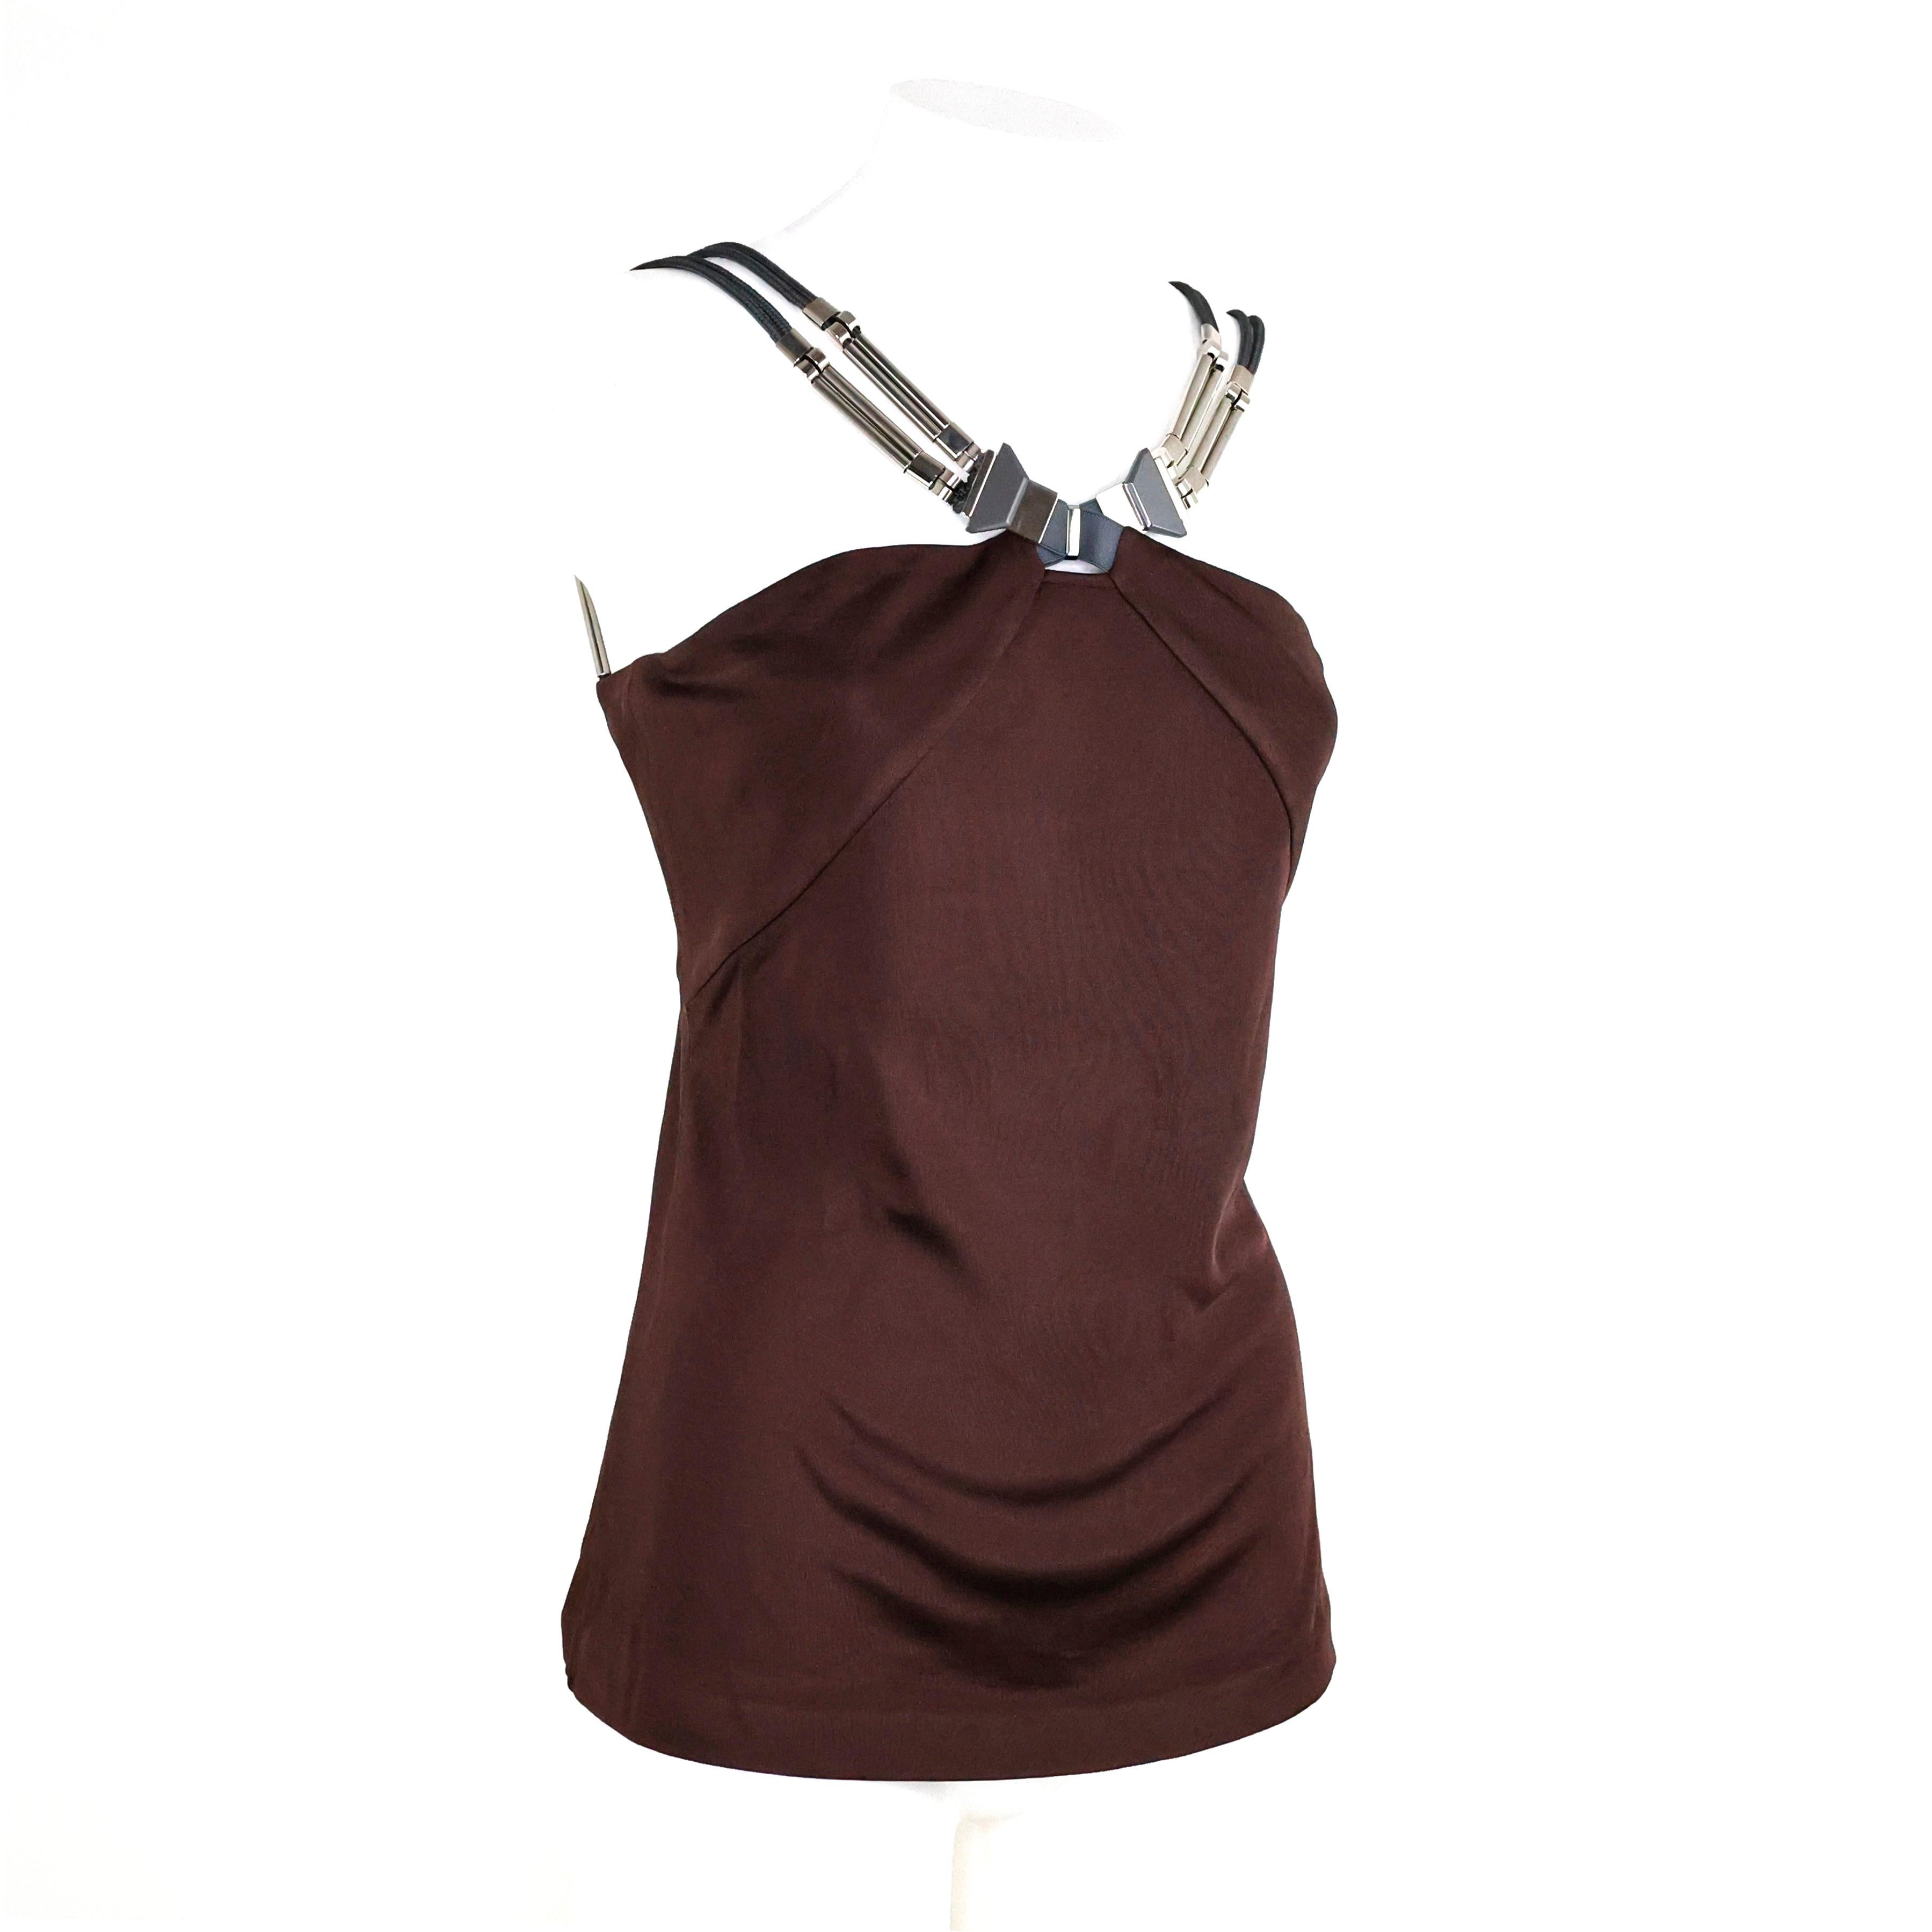 Gucci Sleeveless Embellished Top In Excellent Condition For Sale In Bressanone, IT